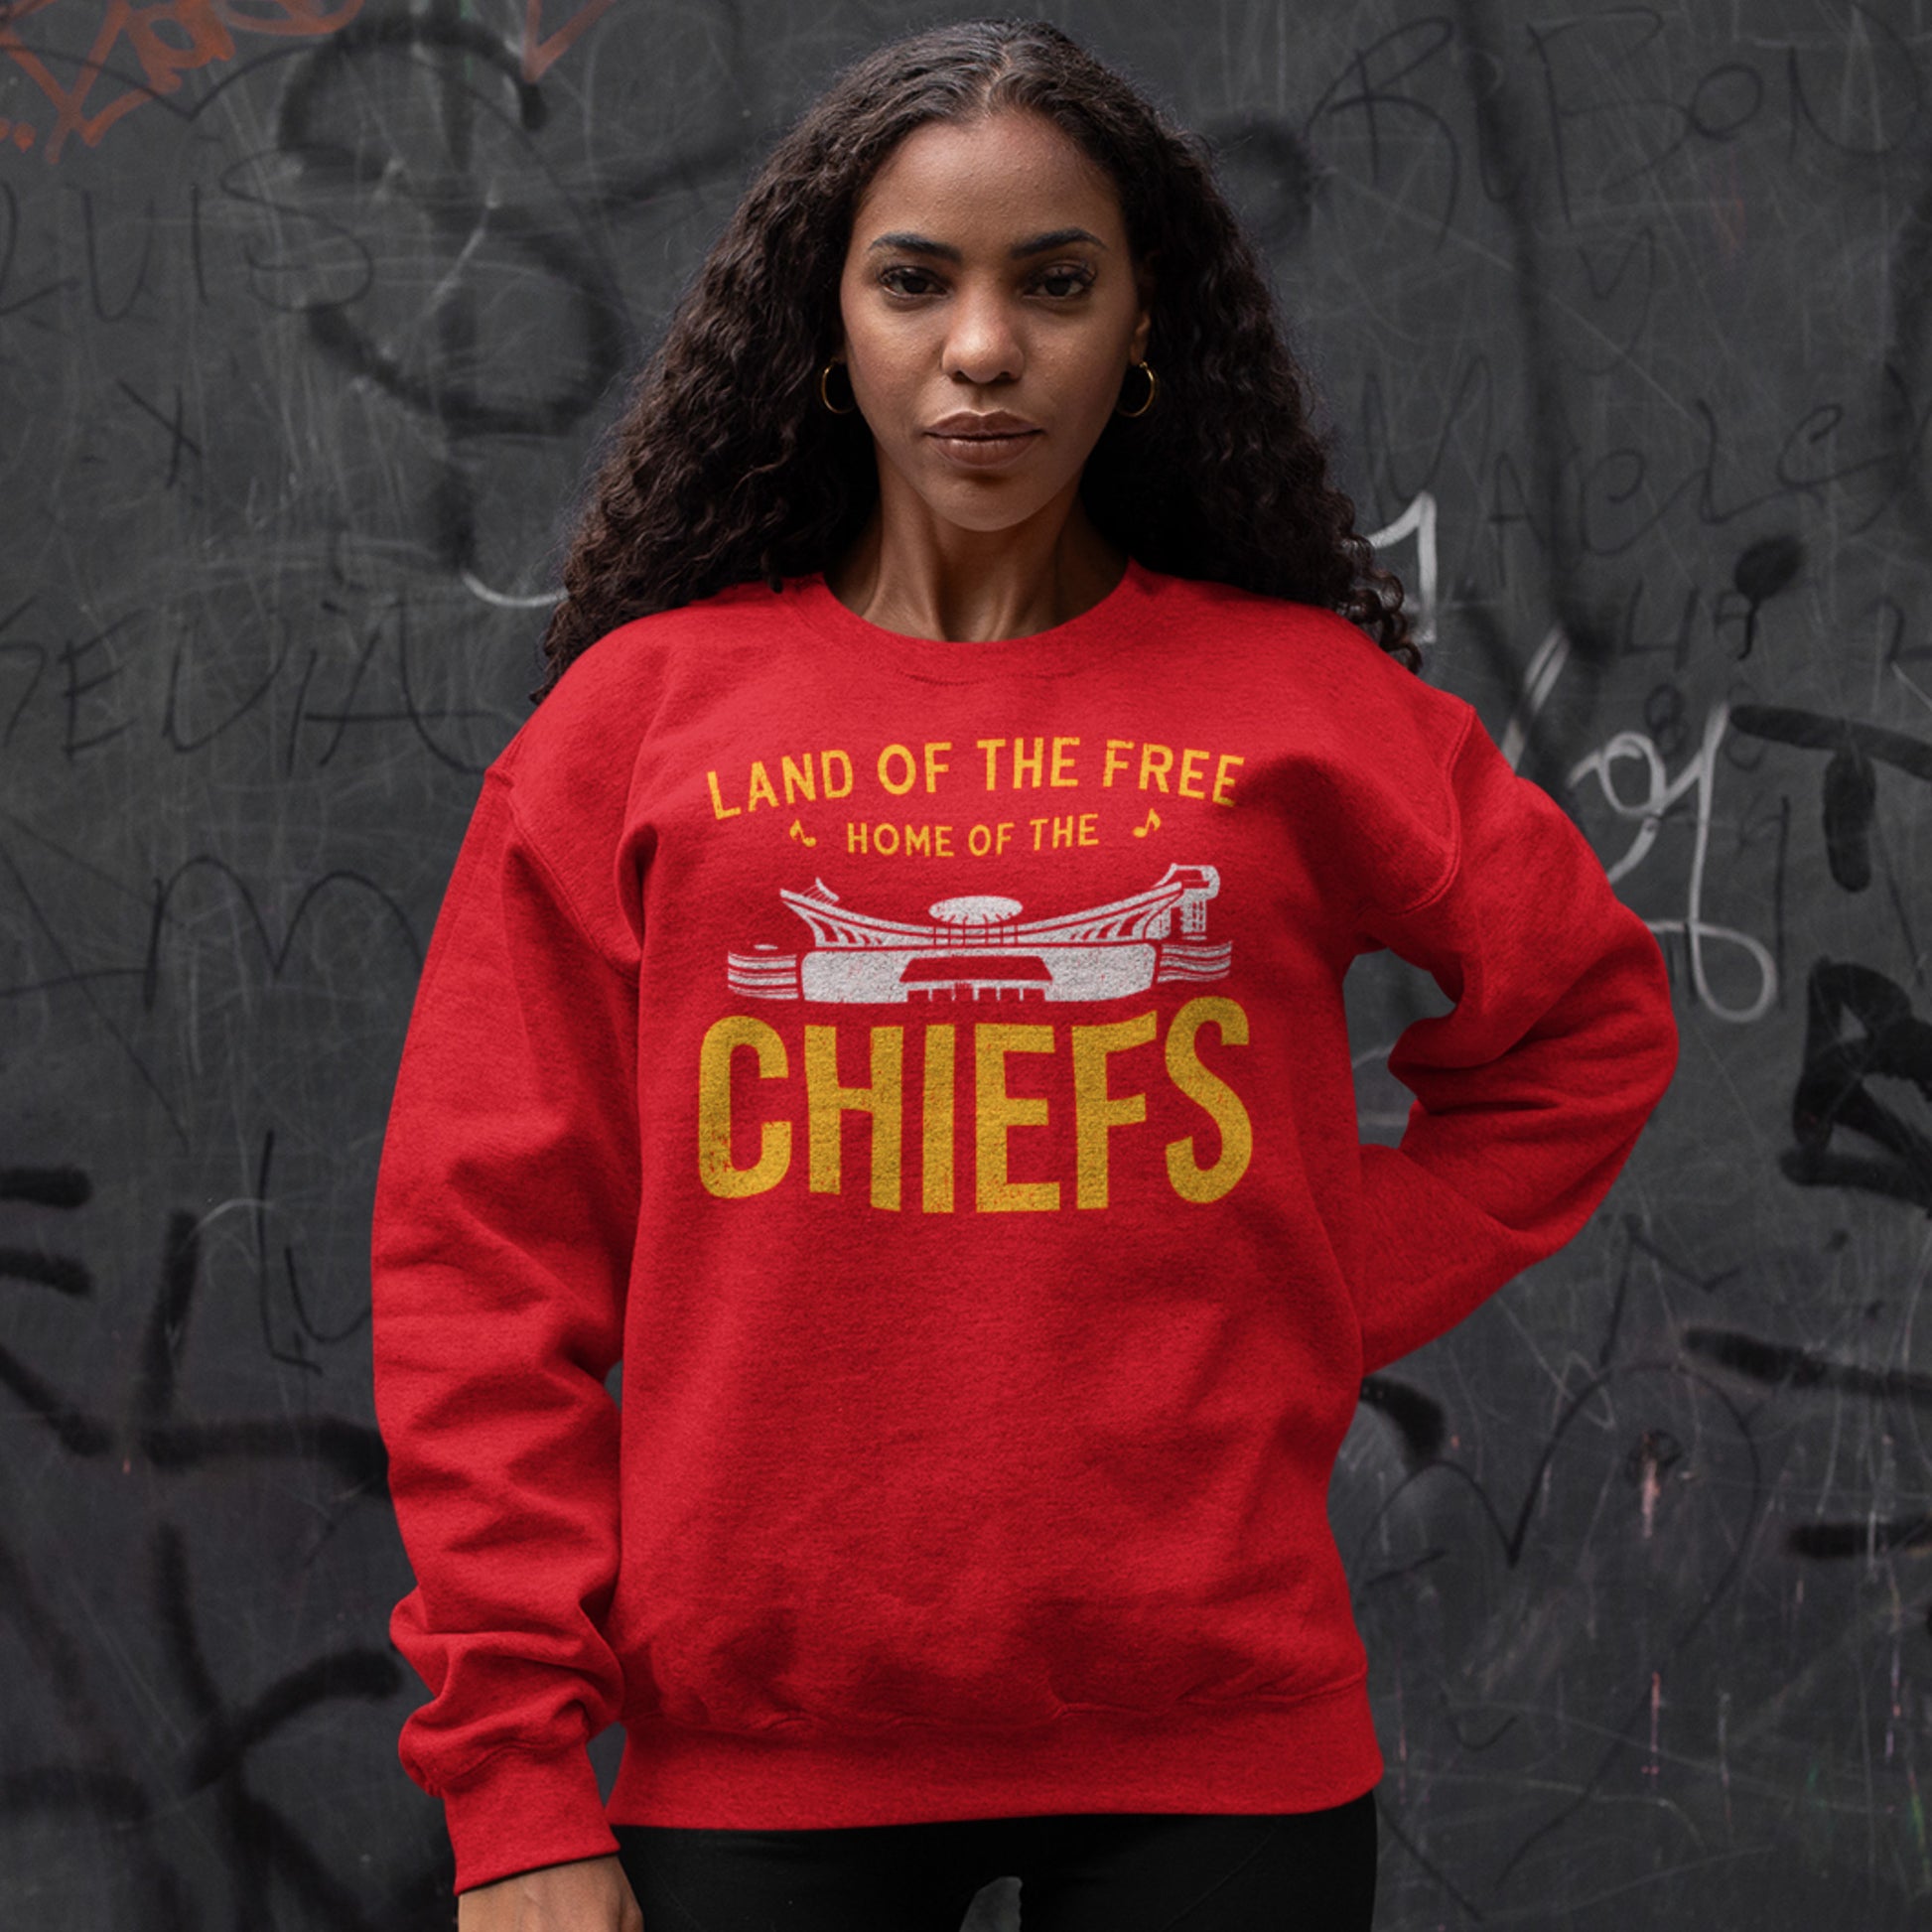 KC Swag Kansas City Chiefs Distressed White & Gold Home Of The Chiefs on a Red Crewneck Sweatshirt worn by female model standing in front of a dark gray graffitied wall